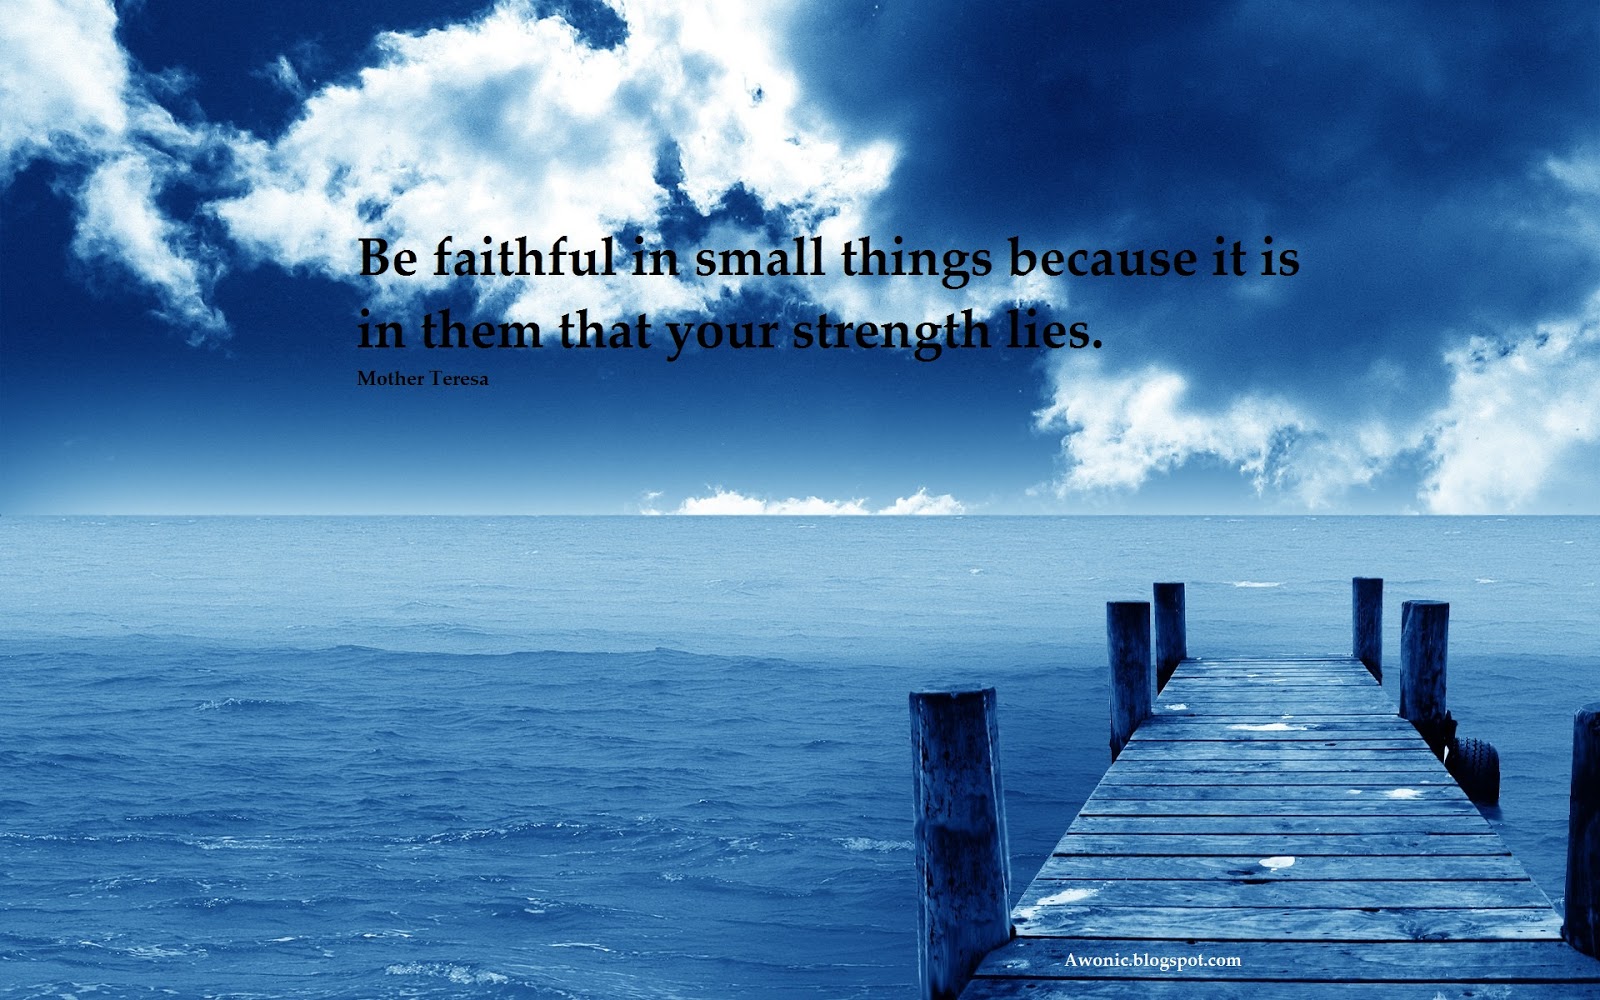 Be faithful in little things - Mother Theresa